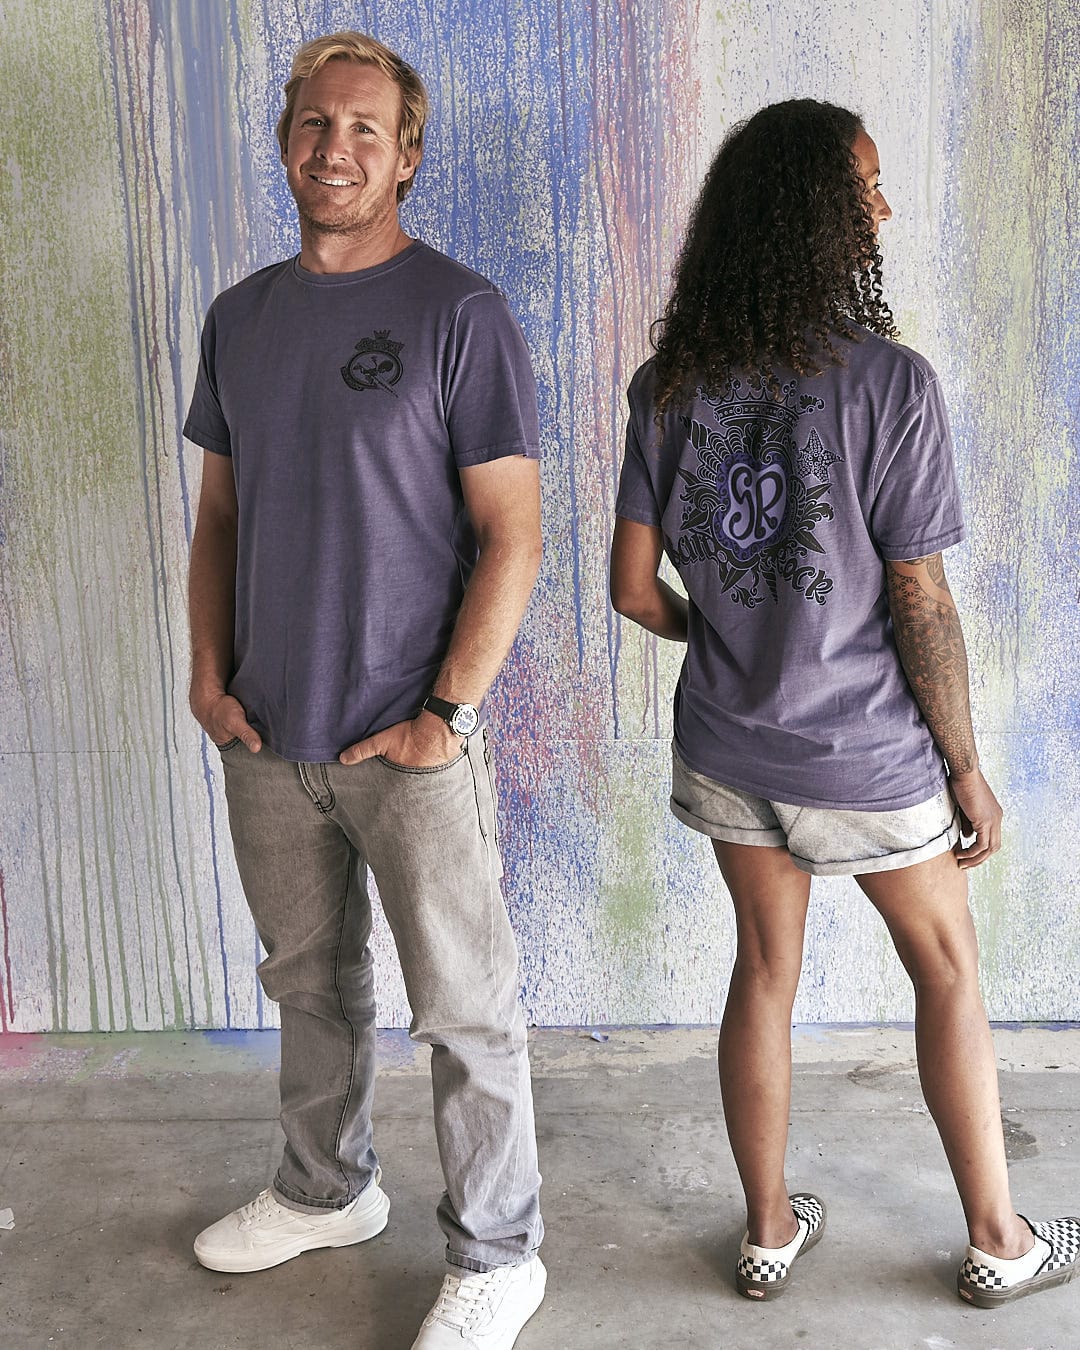 A man and woman standing next to each other wearing Saltrock's Tribal Saltrock - Limited Edition 35 Years T-Shirts.